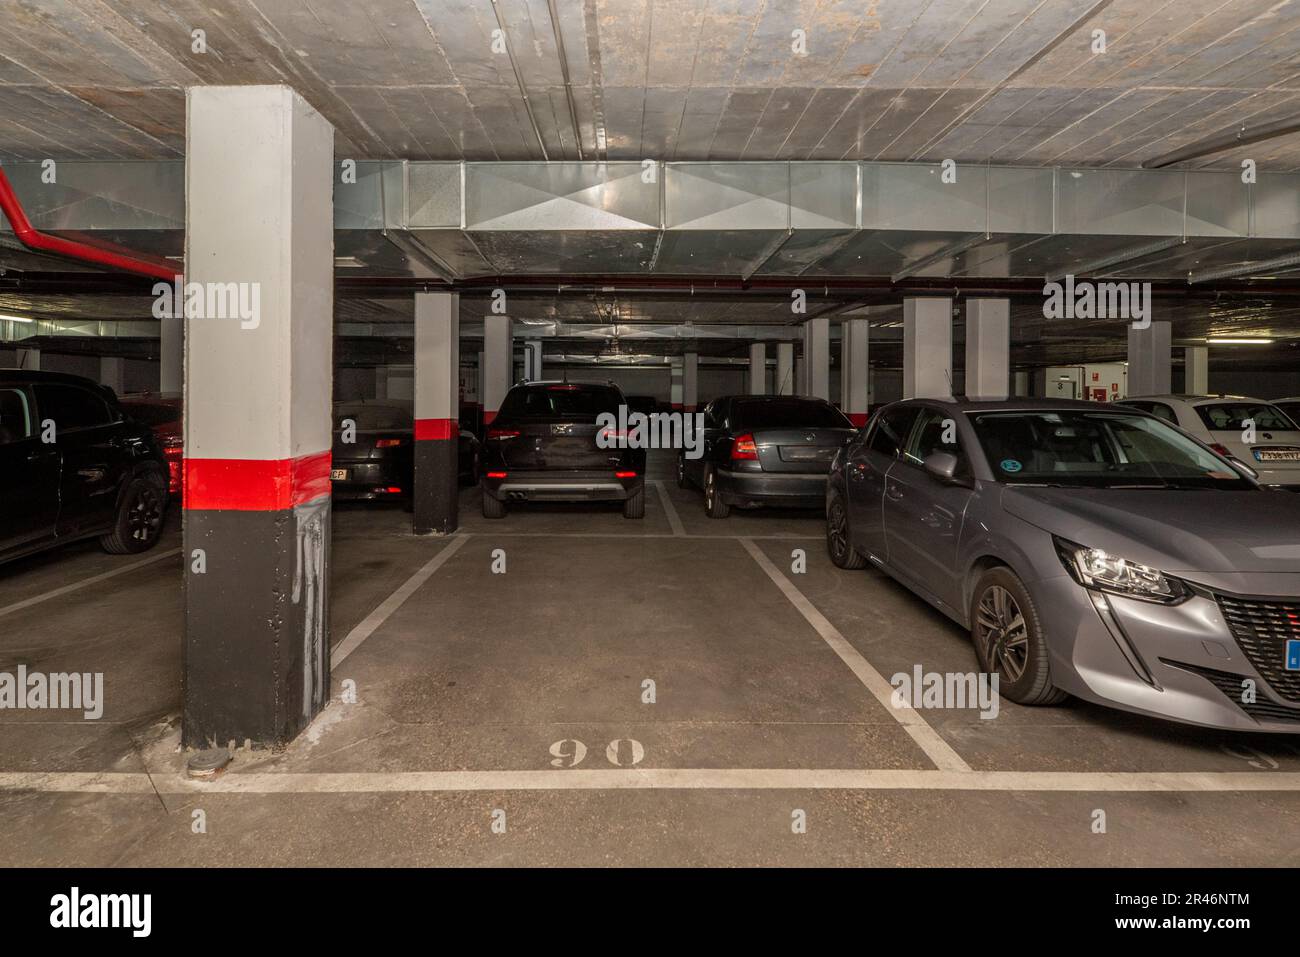 A dark garage with parked cars and free spaces Stock Photo